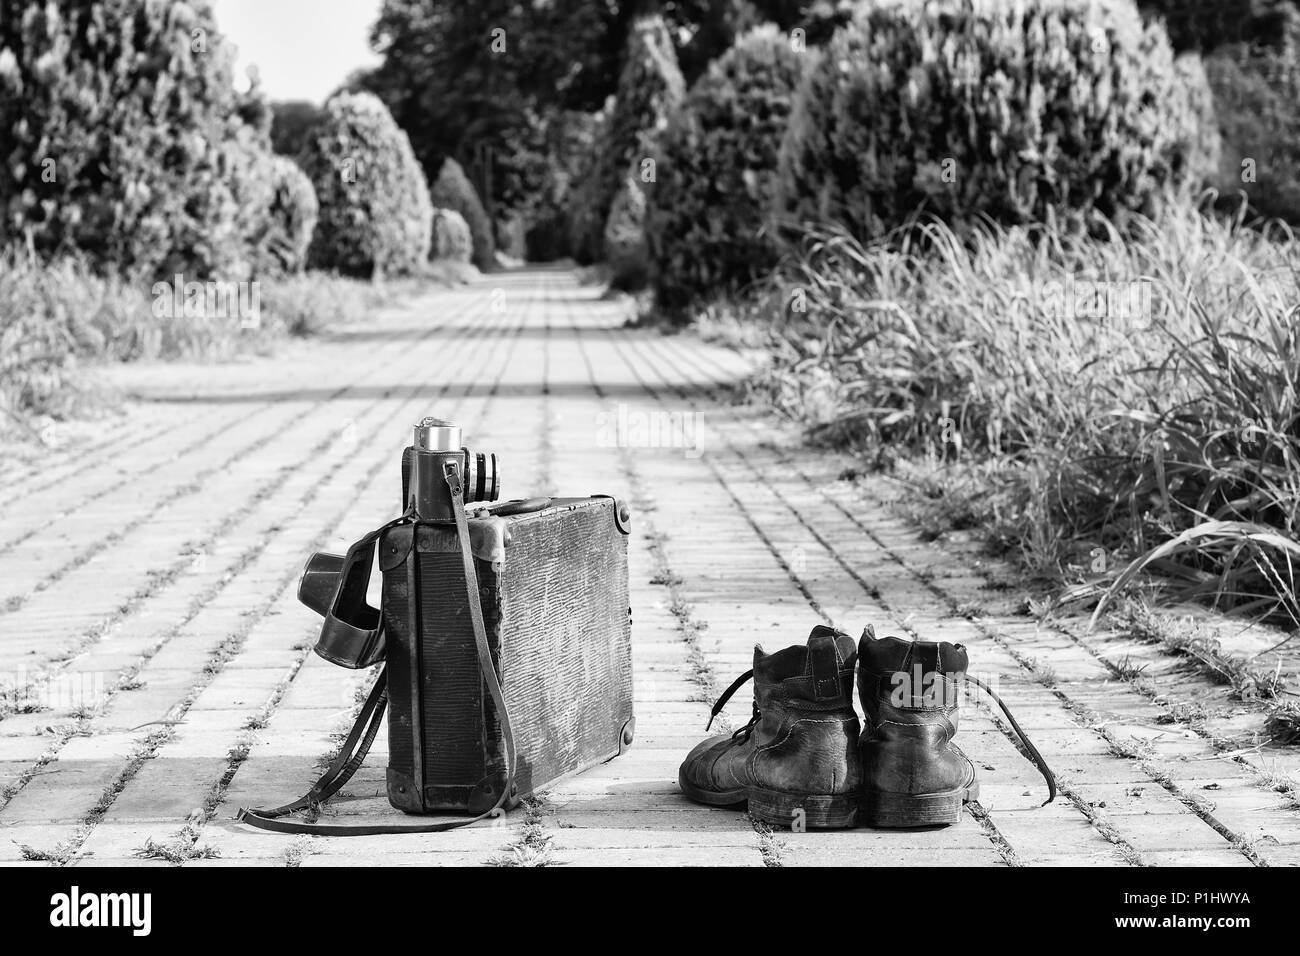 Traveling light! Worn ankle boots next to a vintage cardboard suitcase, a film camera in its open leather case, and a brick road. A B/W photo effect. Stock Photo